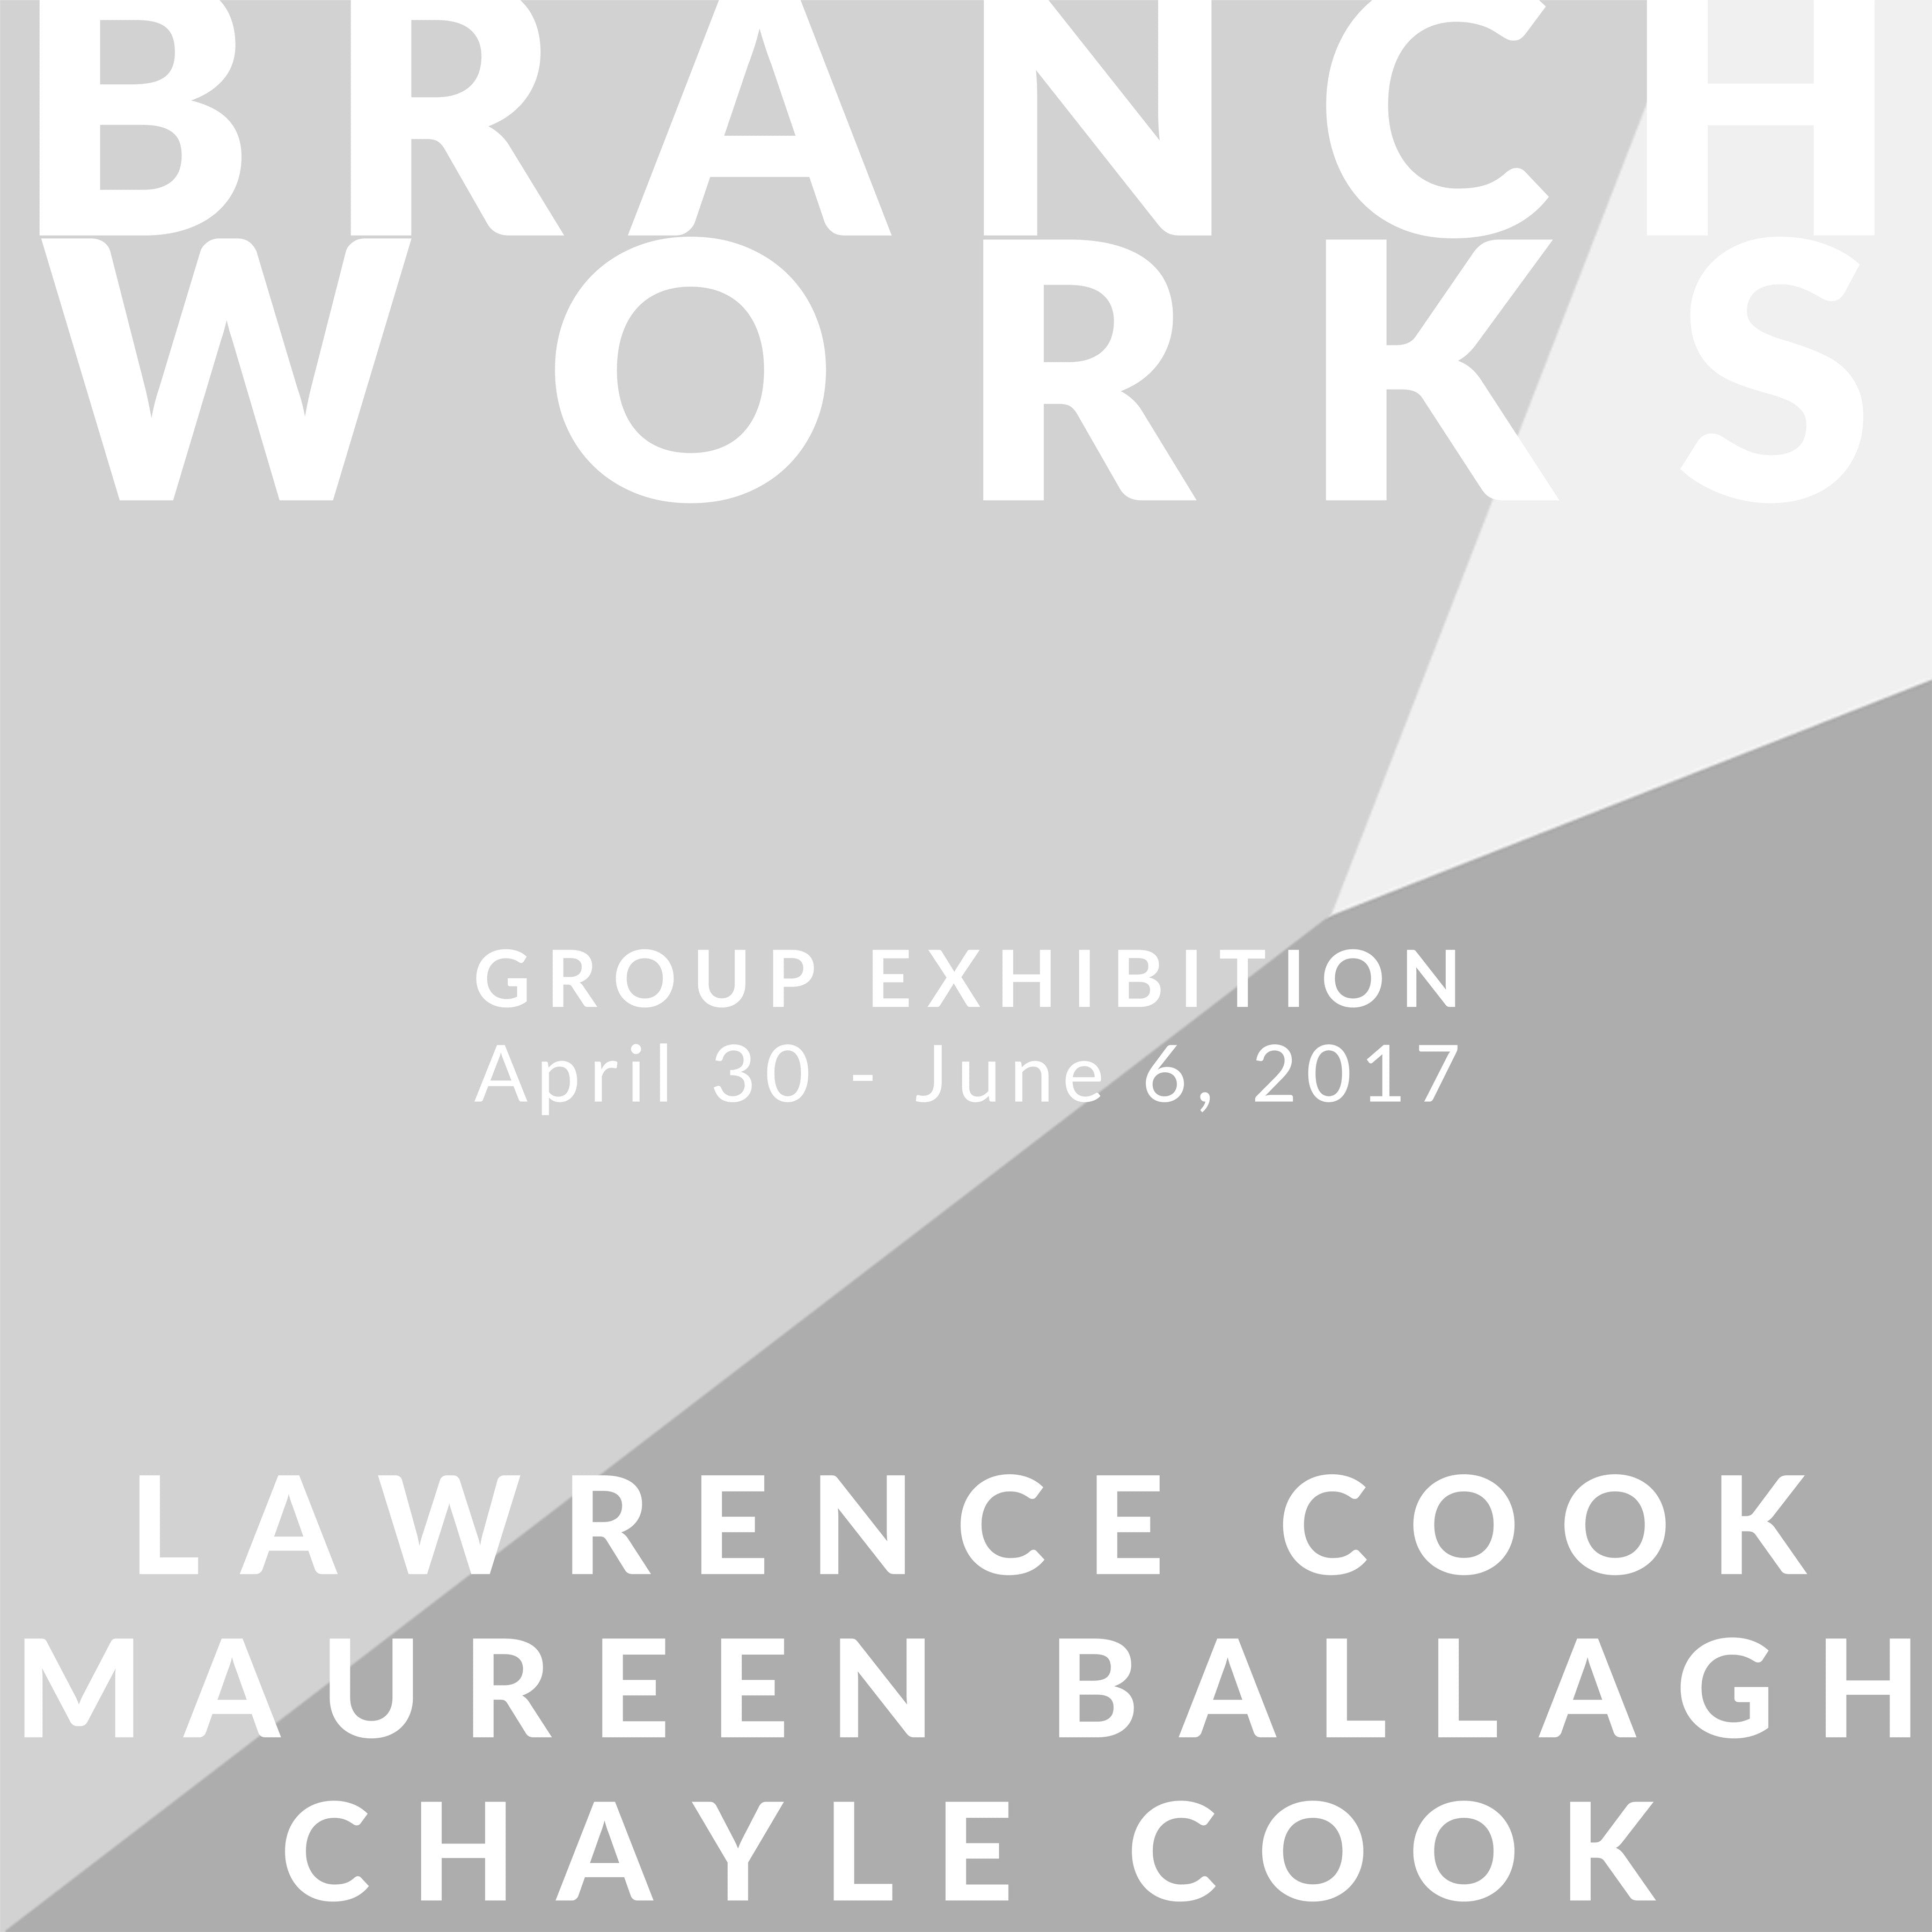 BRANCHWORKS Exhibition at Gallery 200